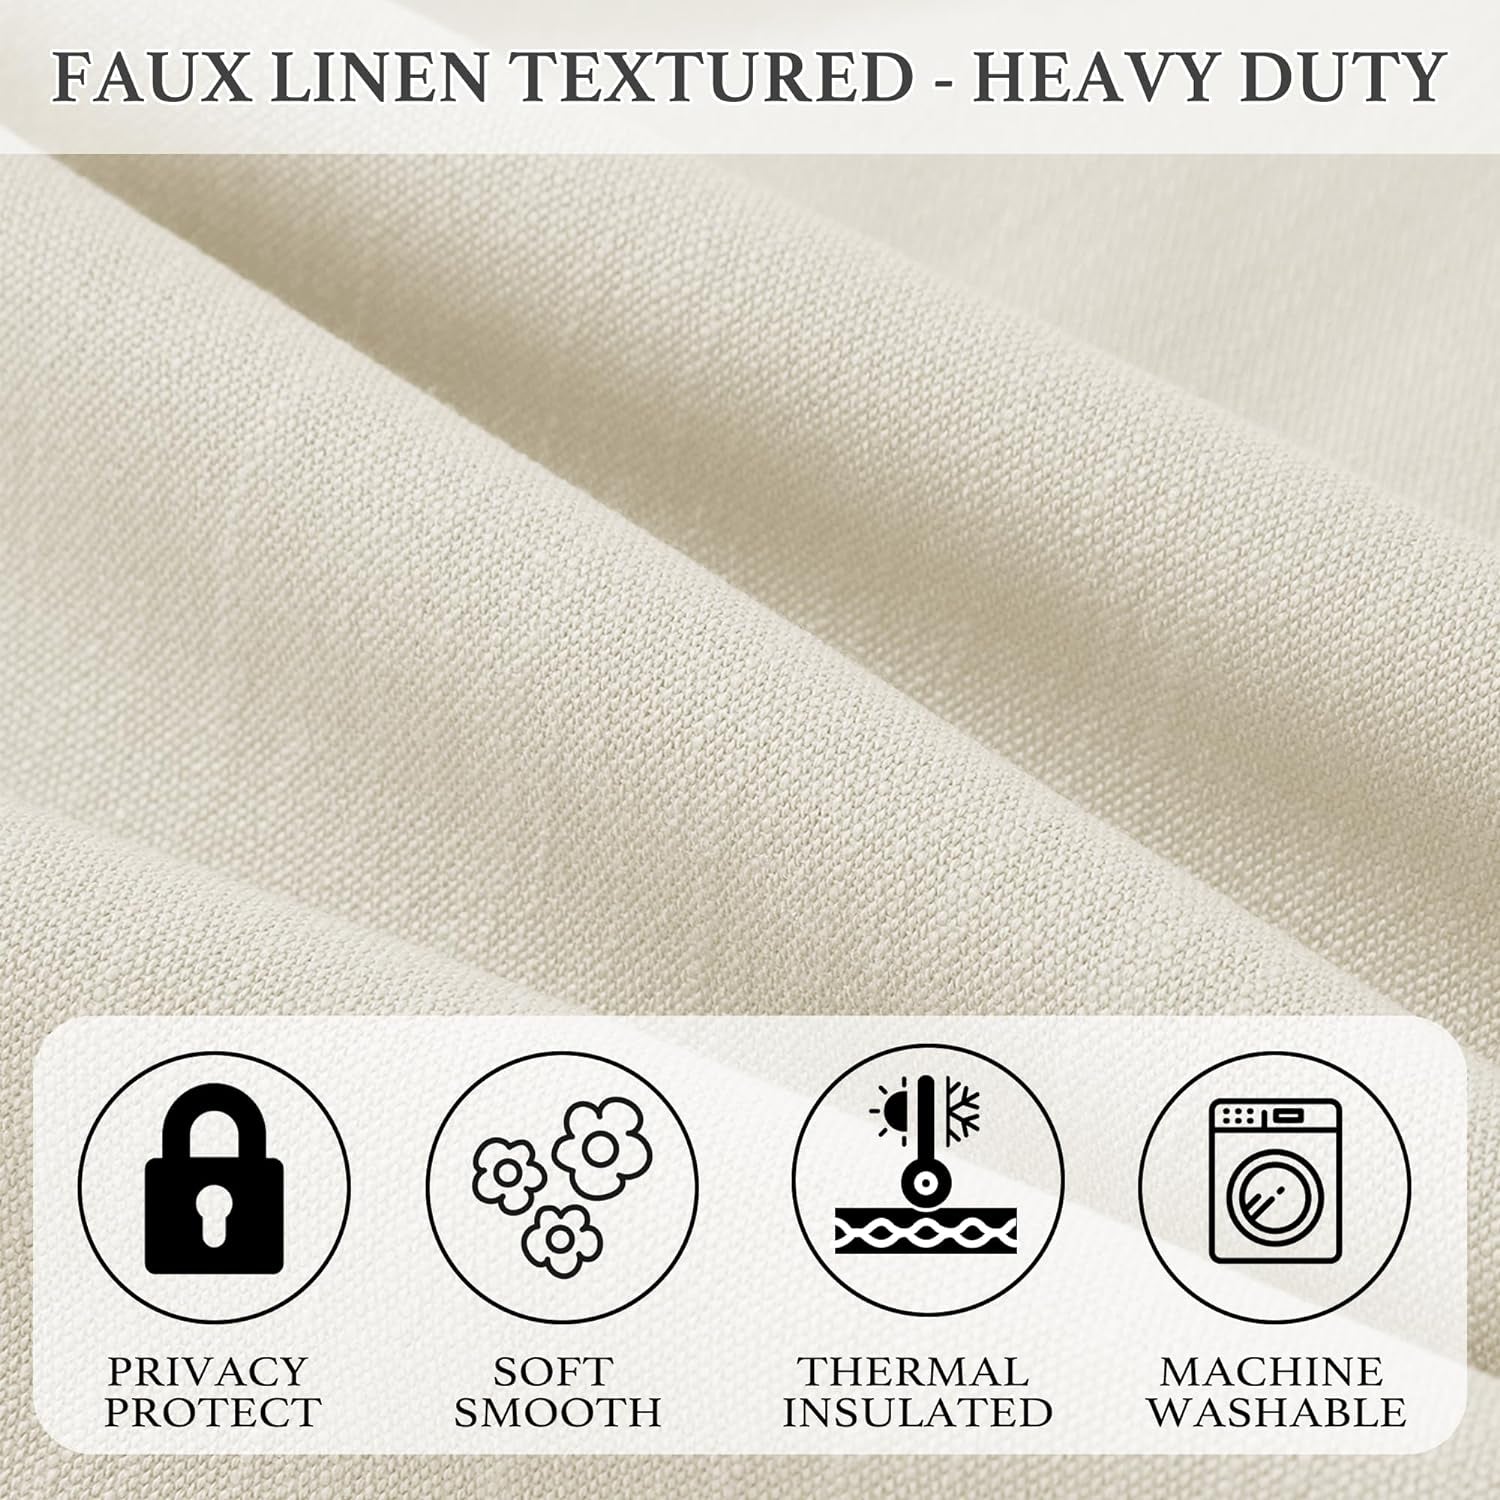 KGORGE Thick Faux Linen Weave Textured Curtains for Bedroom Light Filtering Semi Sheer Curtains Farmhouse Decor Pinch Pleated Window Drapes for Living Room, Linen, W 52" X L 96", 2 Pcs  KGORGE   